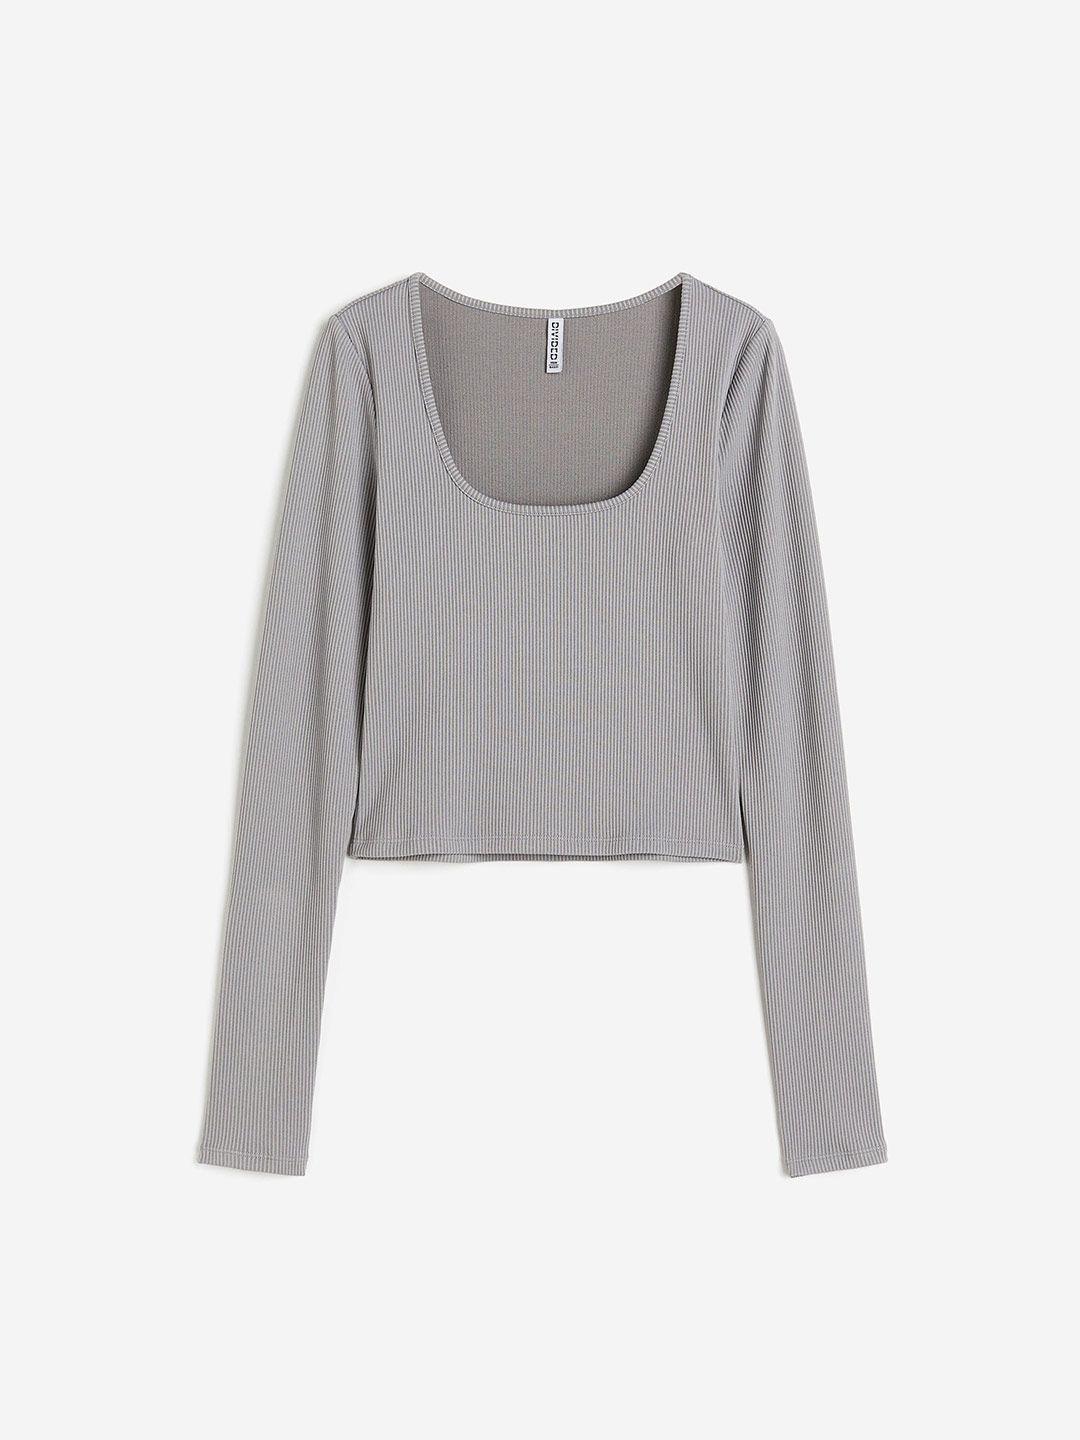 h&m cropped jersey top